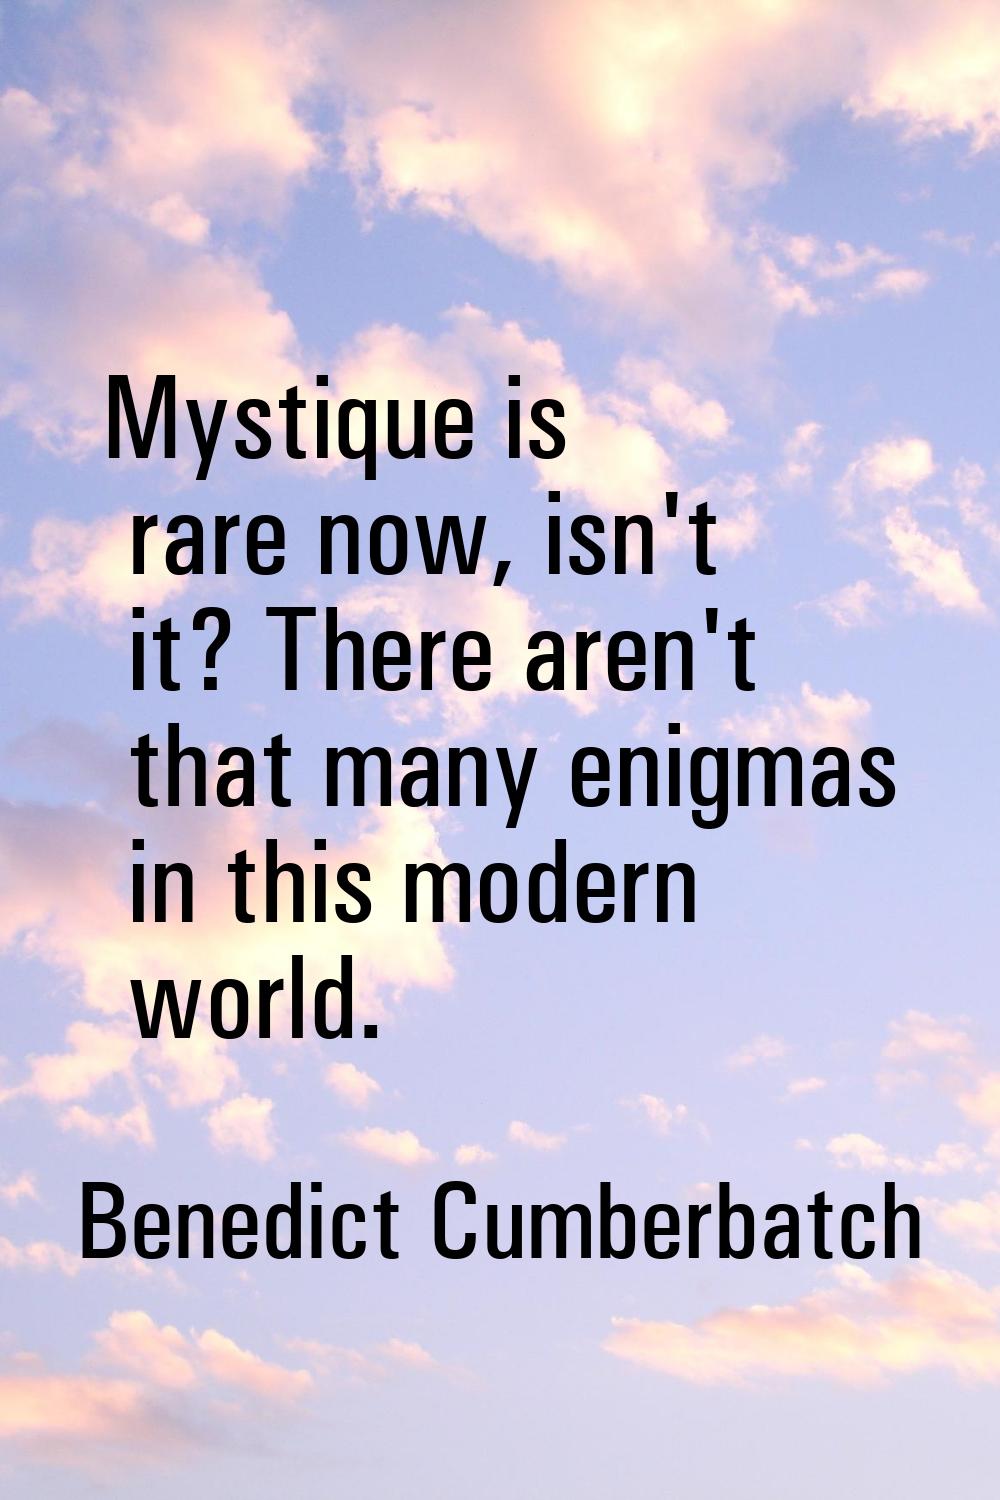 Mystique is rare now, isn't it? There aren't that many enigmas in this modern world.